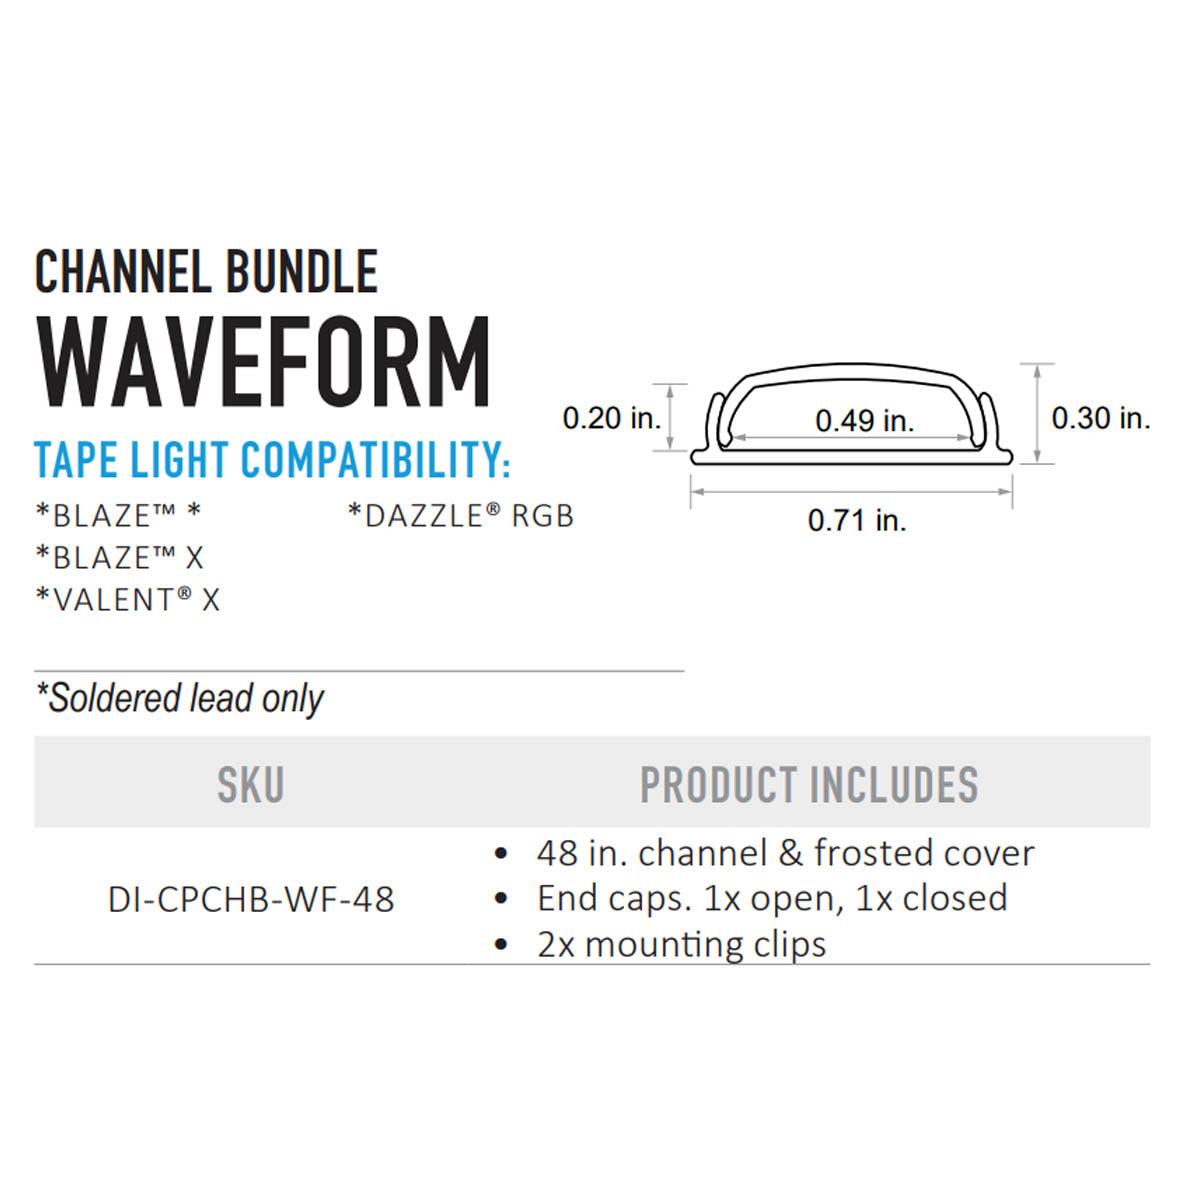 Channel Bundle, WAVEFORM Channel for Tape lights Up To 12mm, 48 in., Frosted Cover, Aluminum